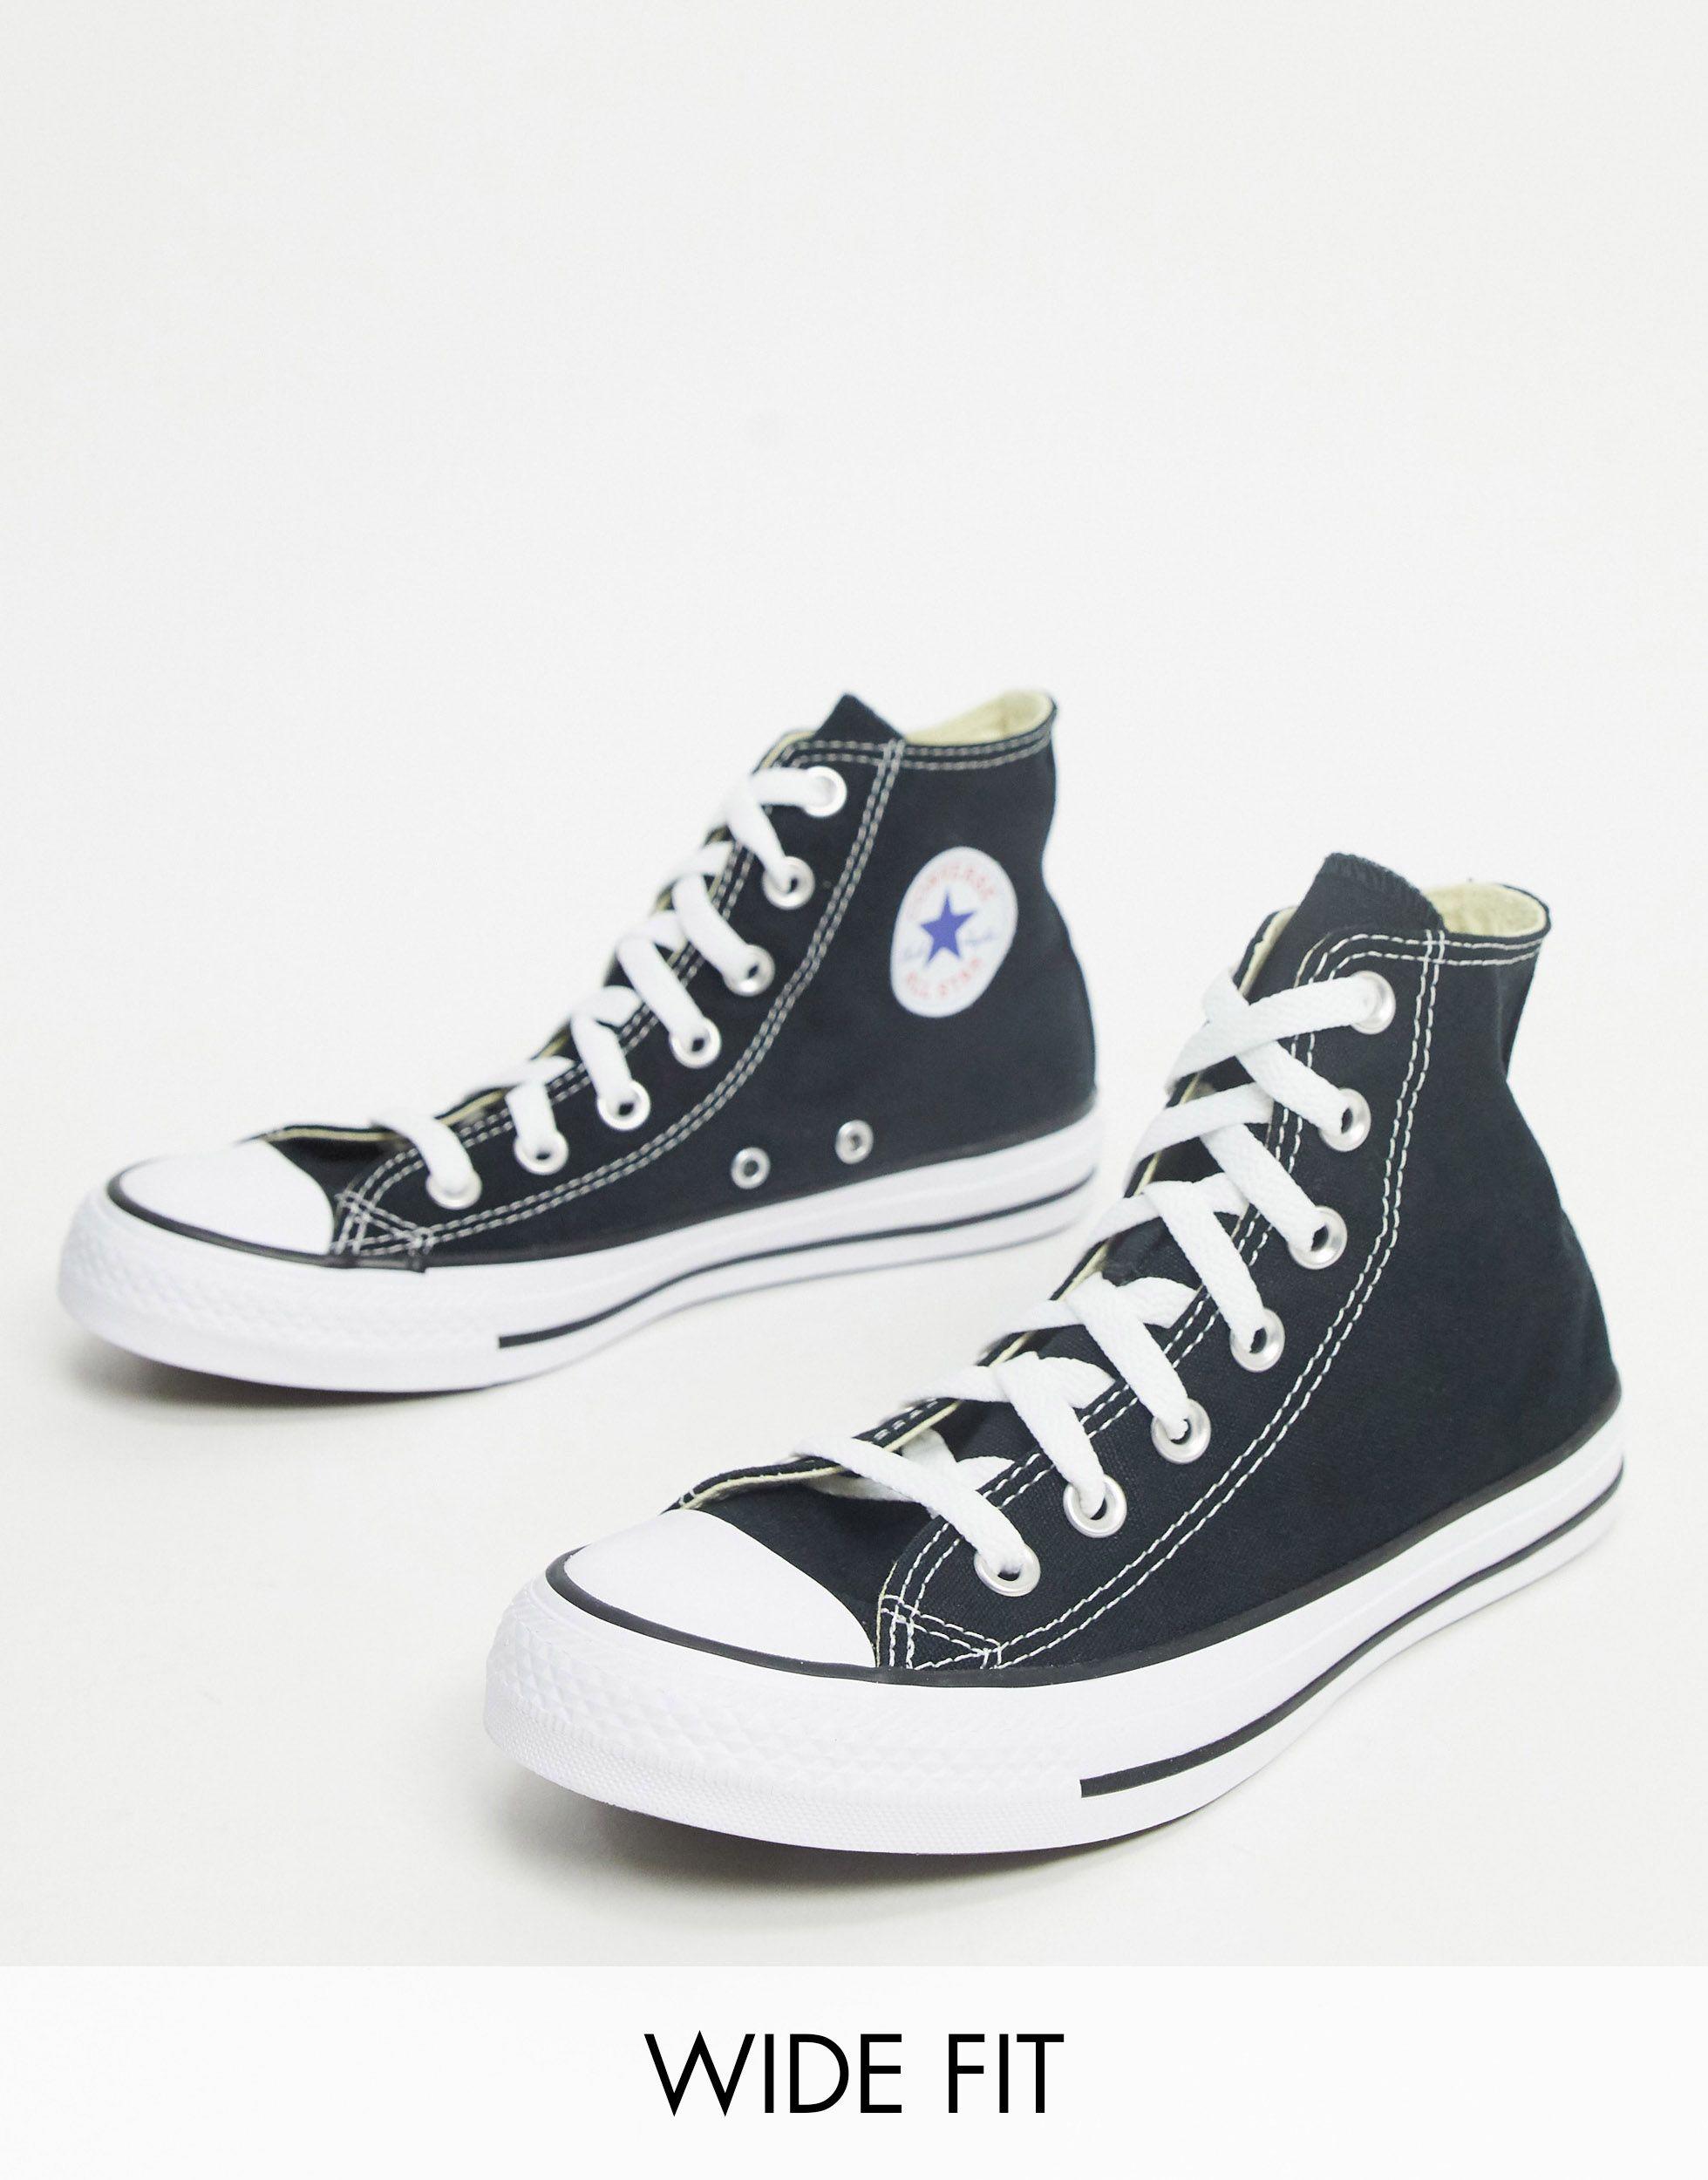 Converse Wide Fit Chuck Taylor All Star Hi Trainers in Black | Lyst UK